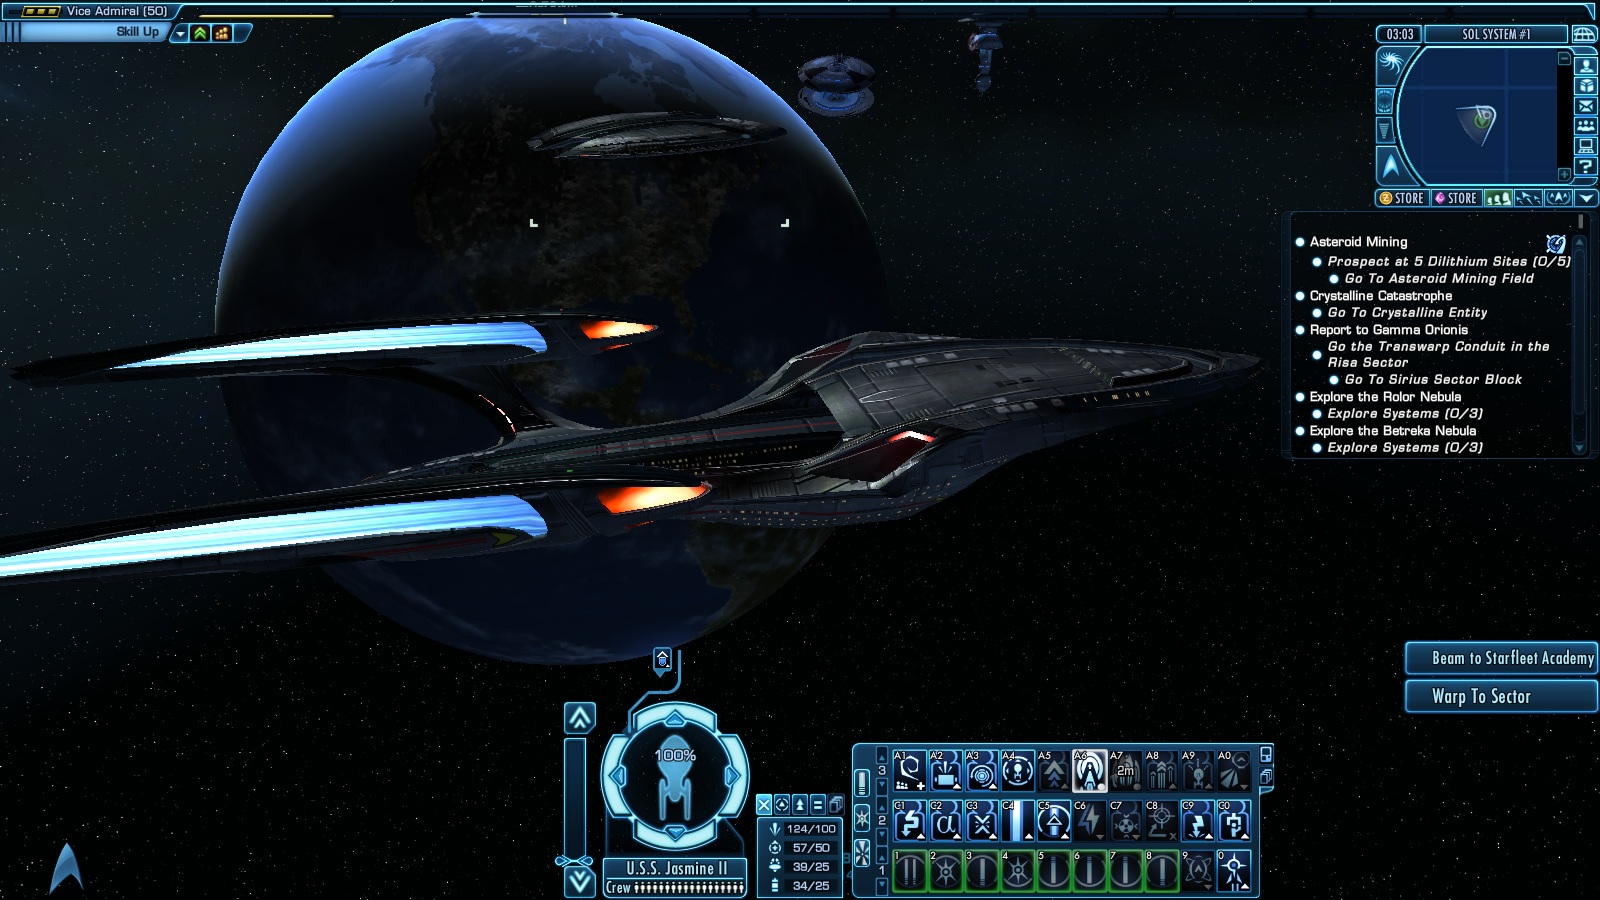 4. The USS Jasmine II NCC 93785 A with her Saucer Section Seperated